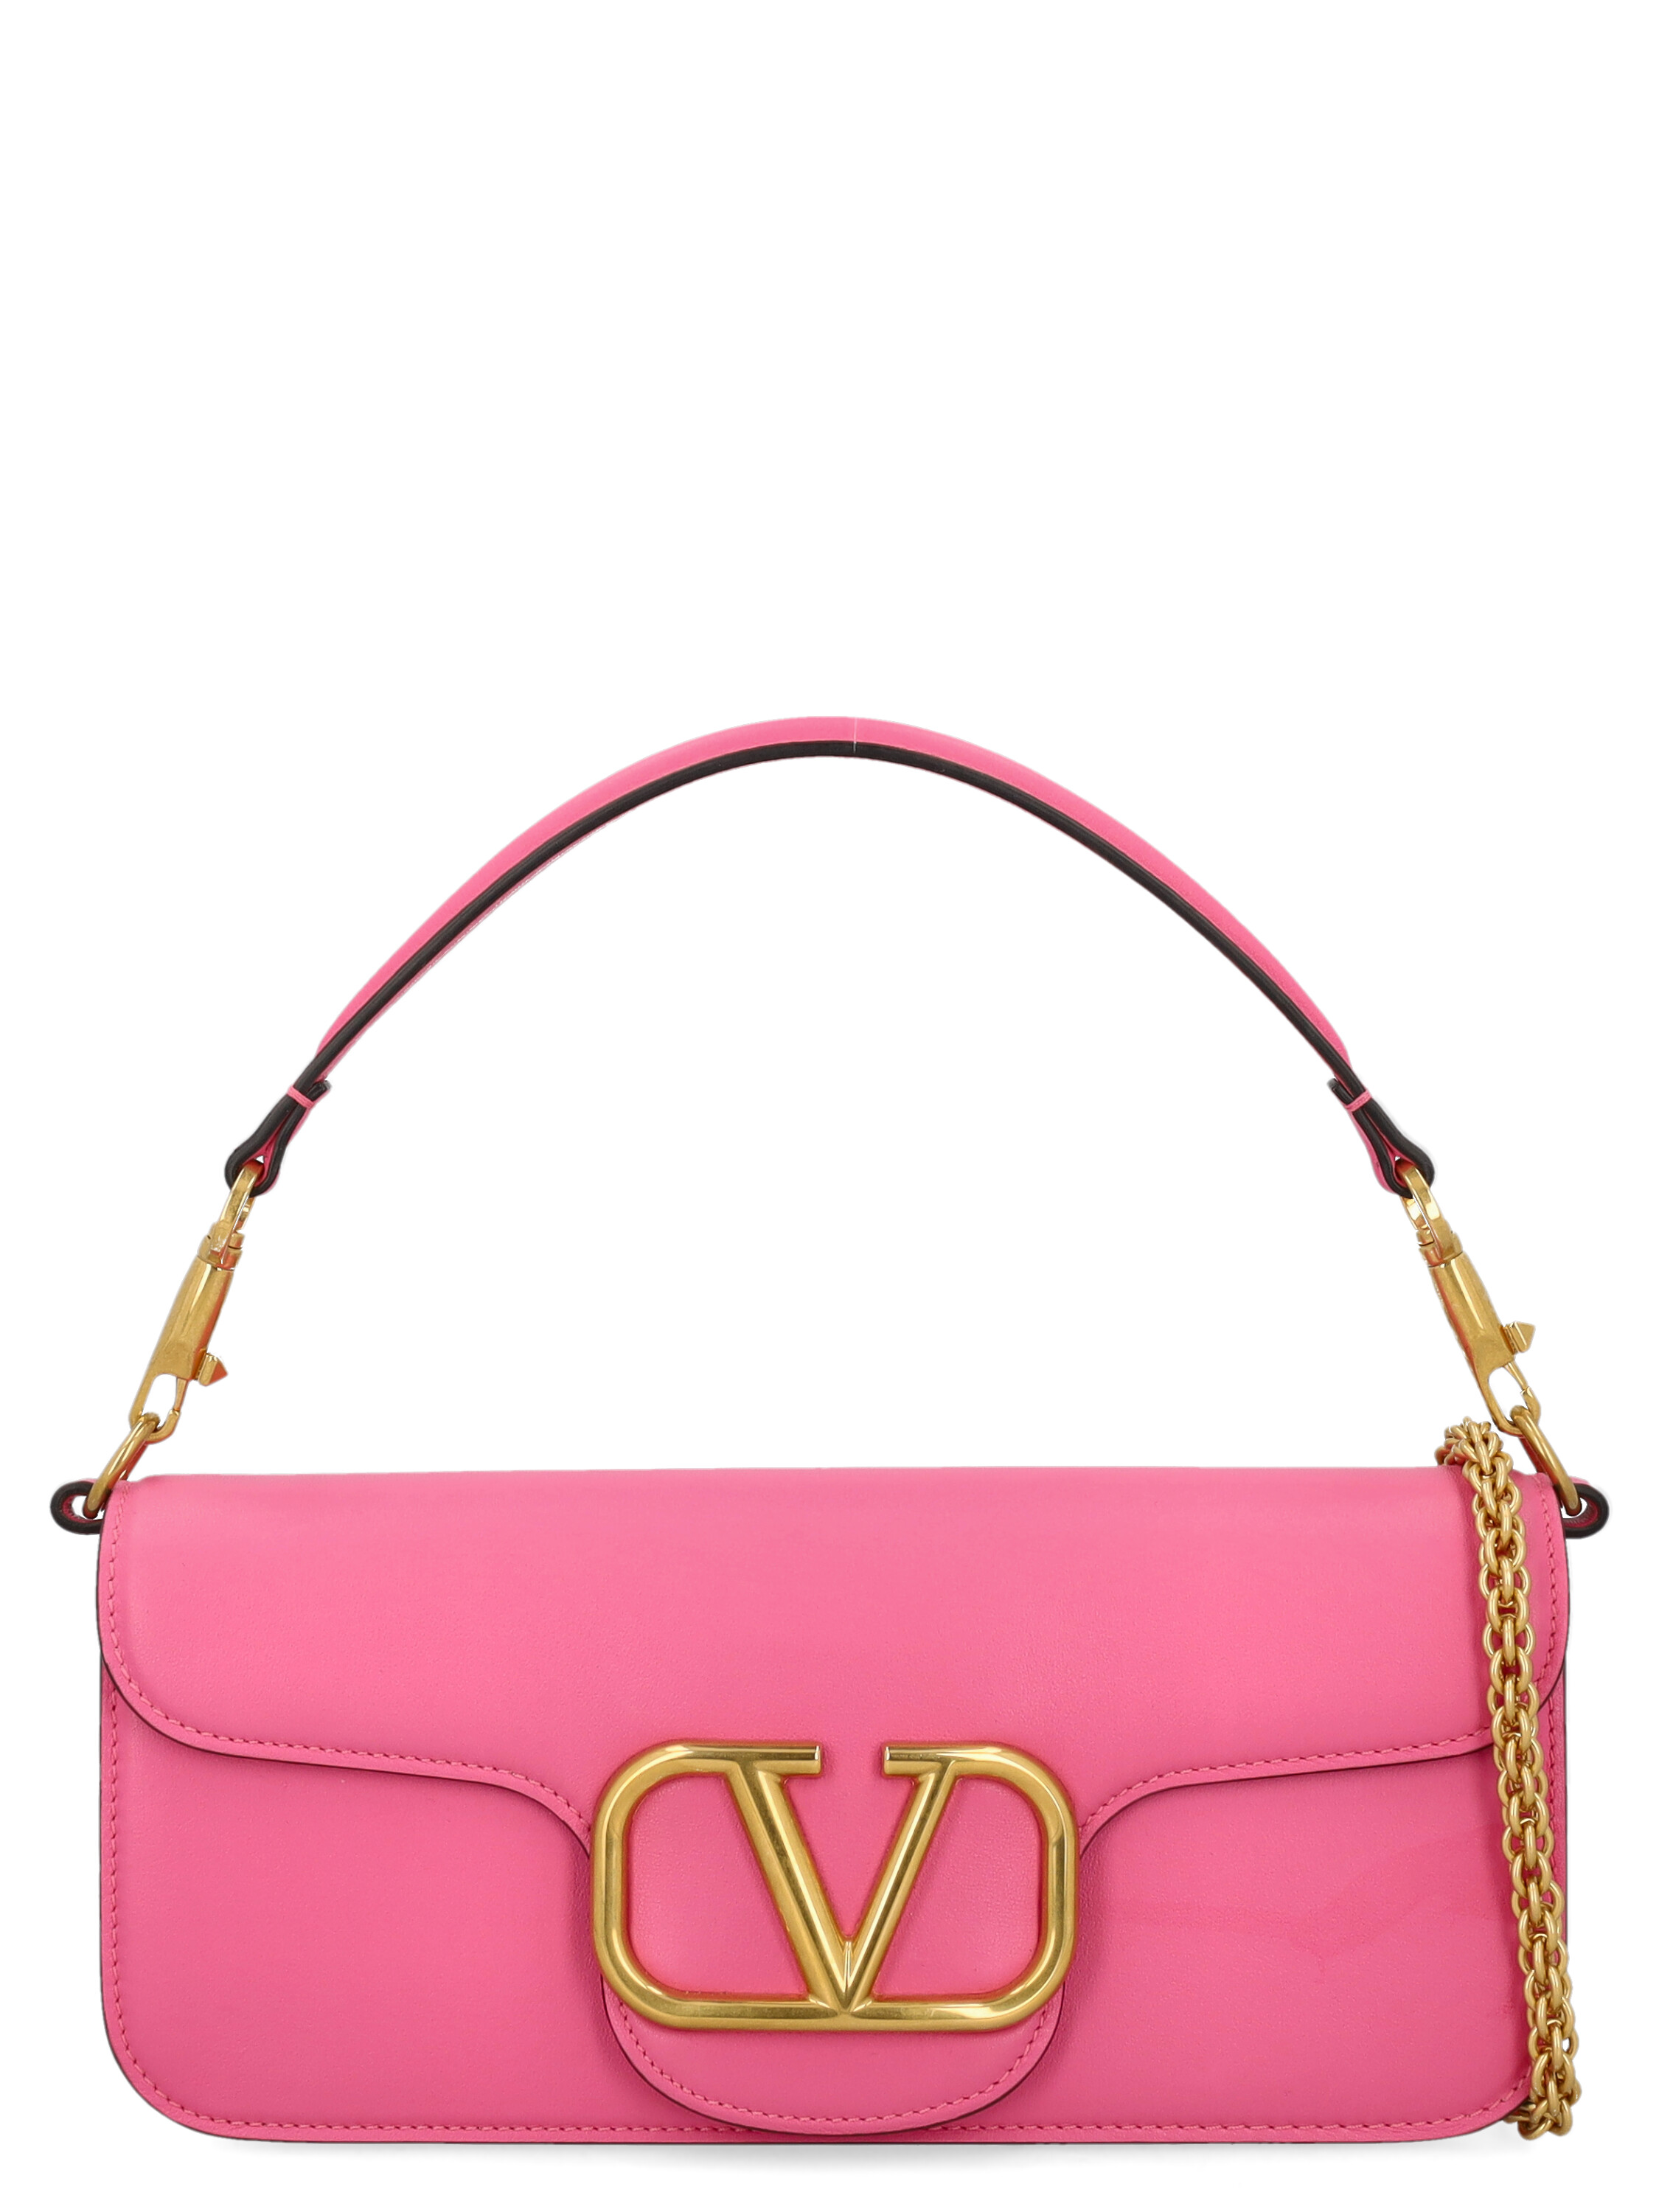 Pre-owned Valentino Garavani Women's Shoulder Bags - Valentino - In Pink Leather